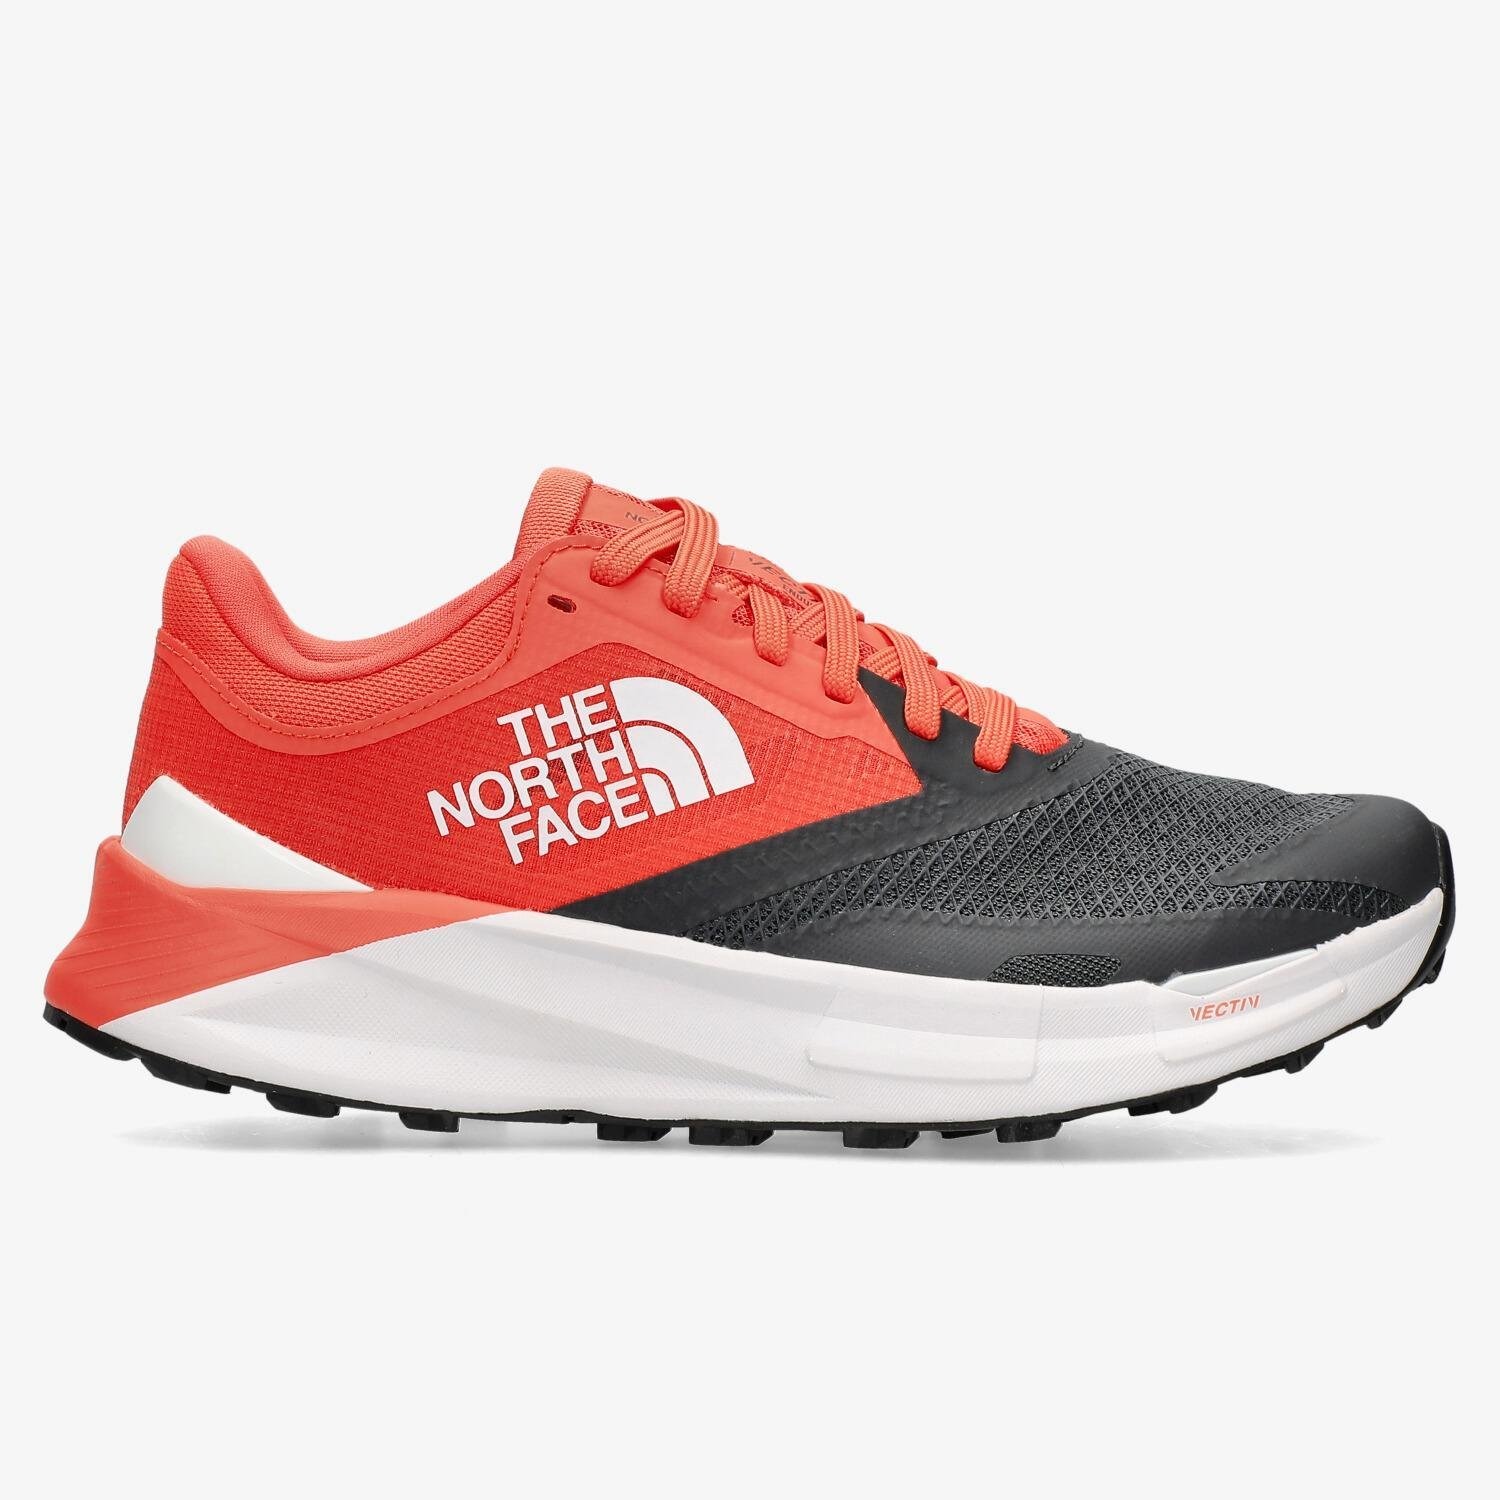 The North Face The north face vectiv enduris hardloopschoenen zwart/rood dames dames